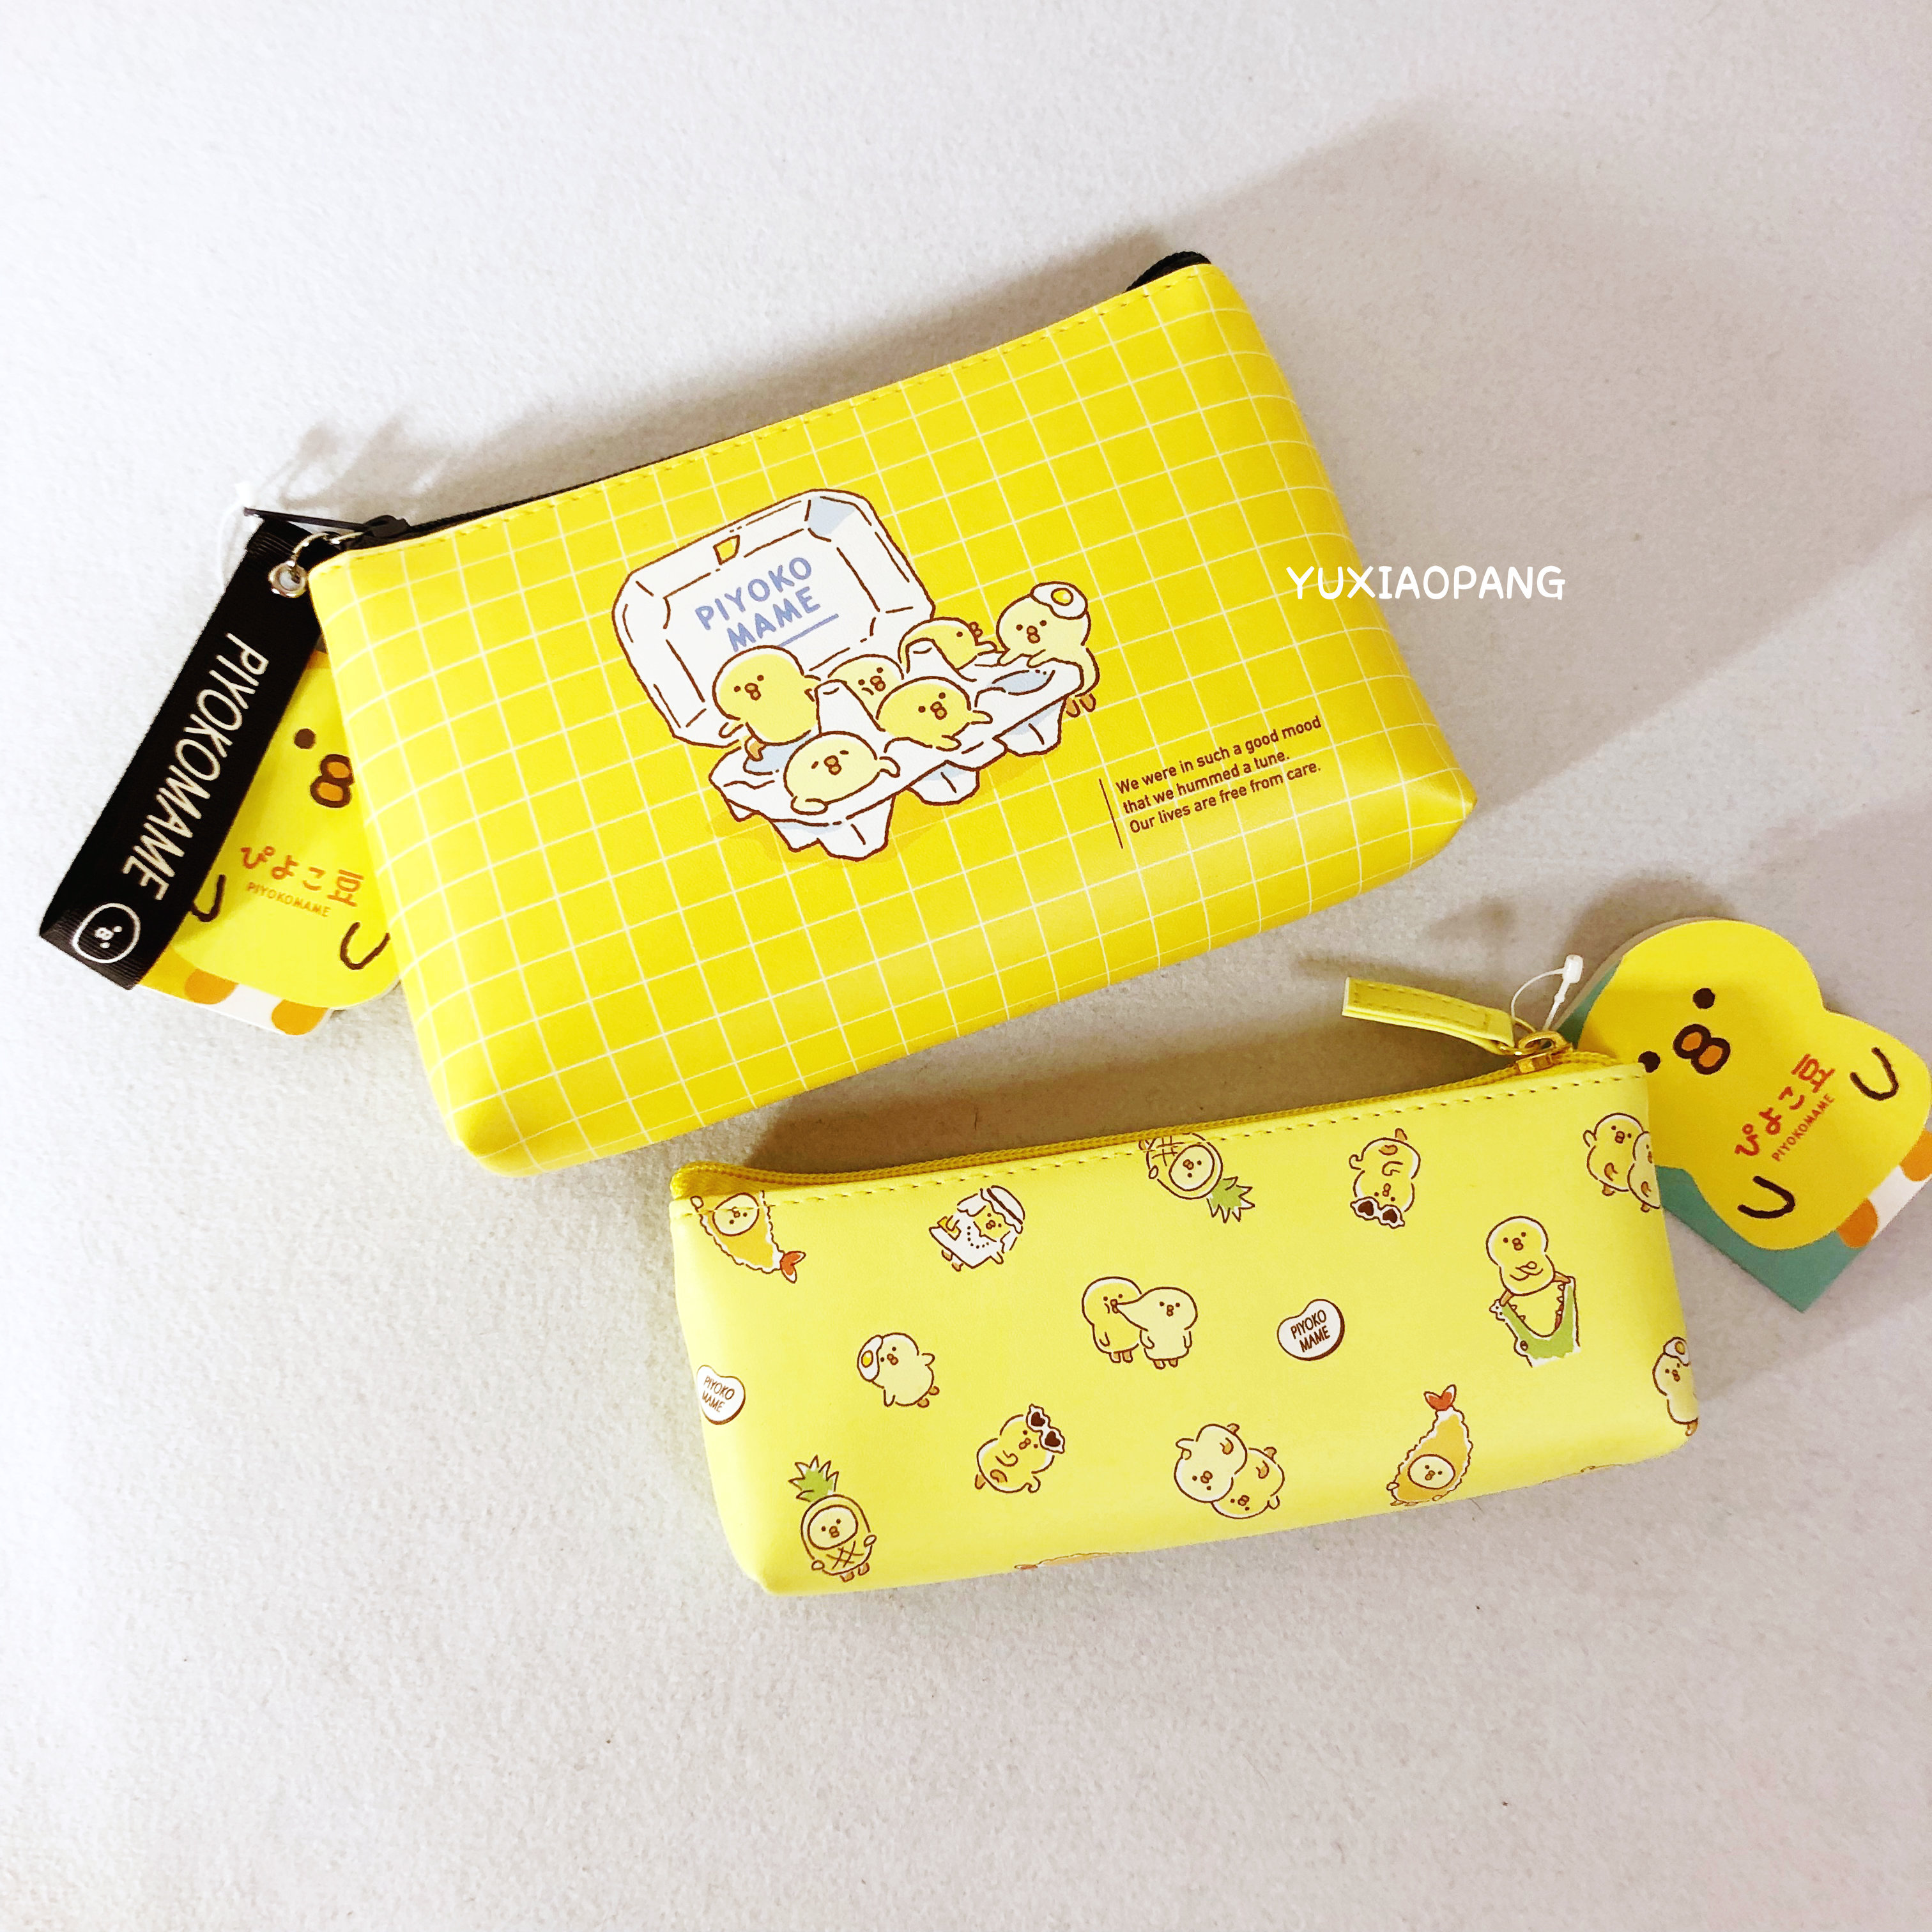 Cute little bean chicken limited Japan MIND WAVE limited edition PU leather pencil case stationery bag coil notebook